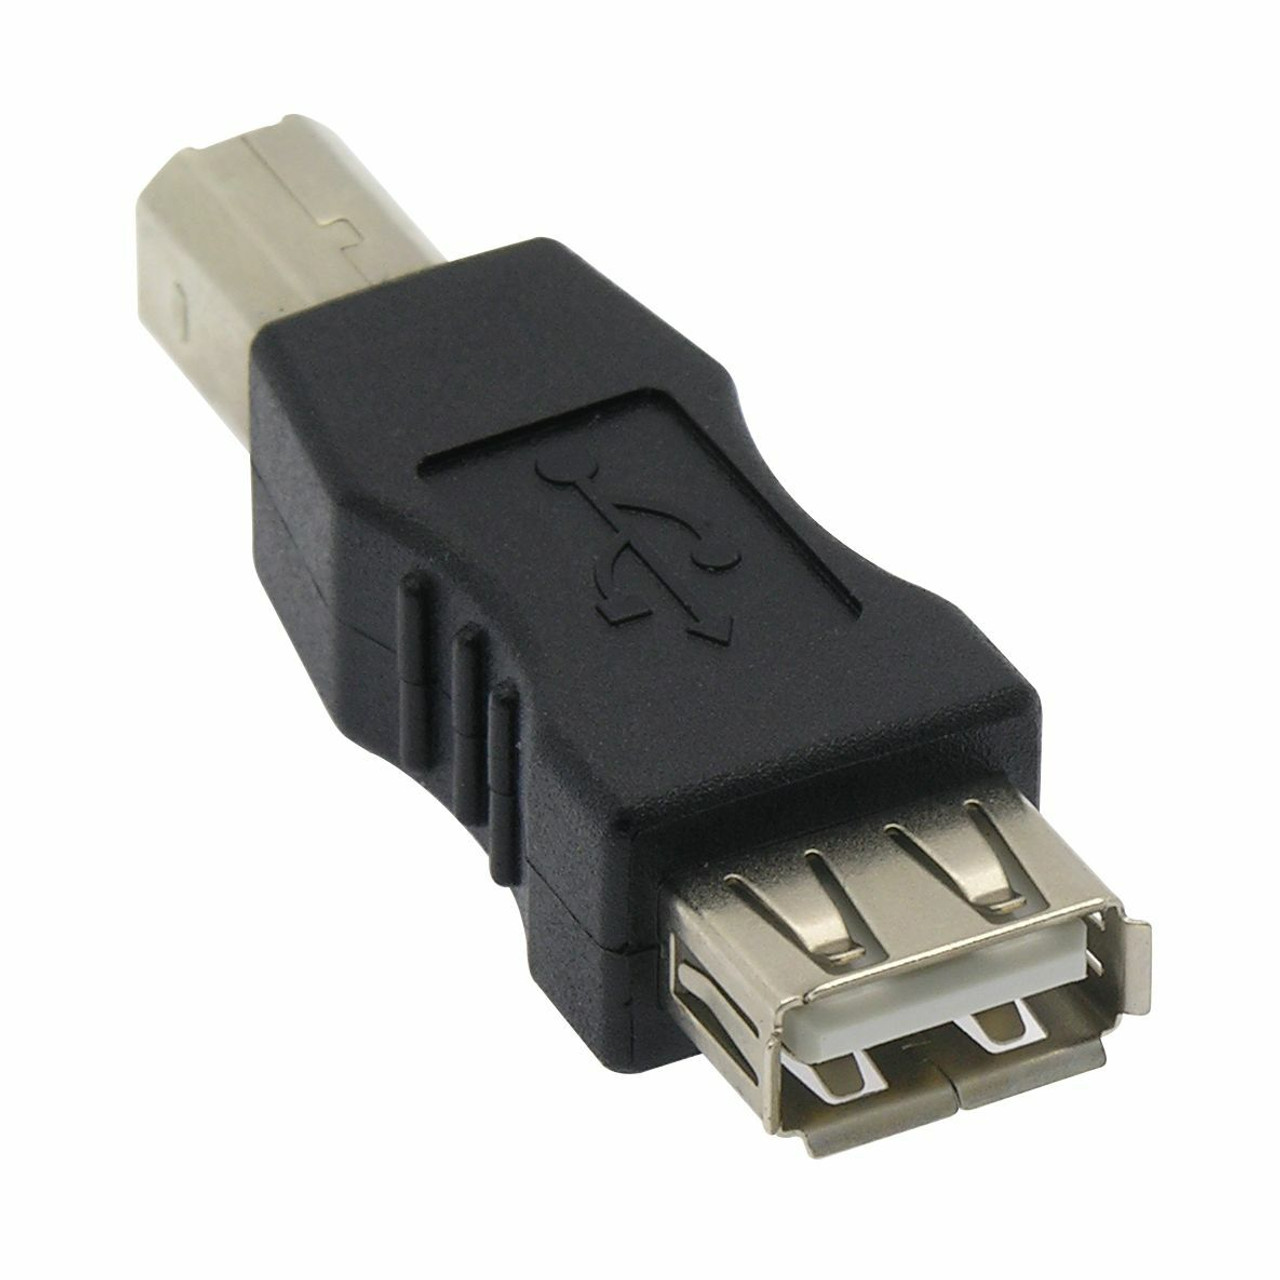 All USB 2.0 Adapters